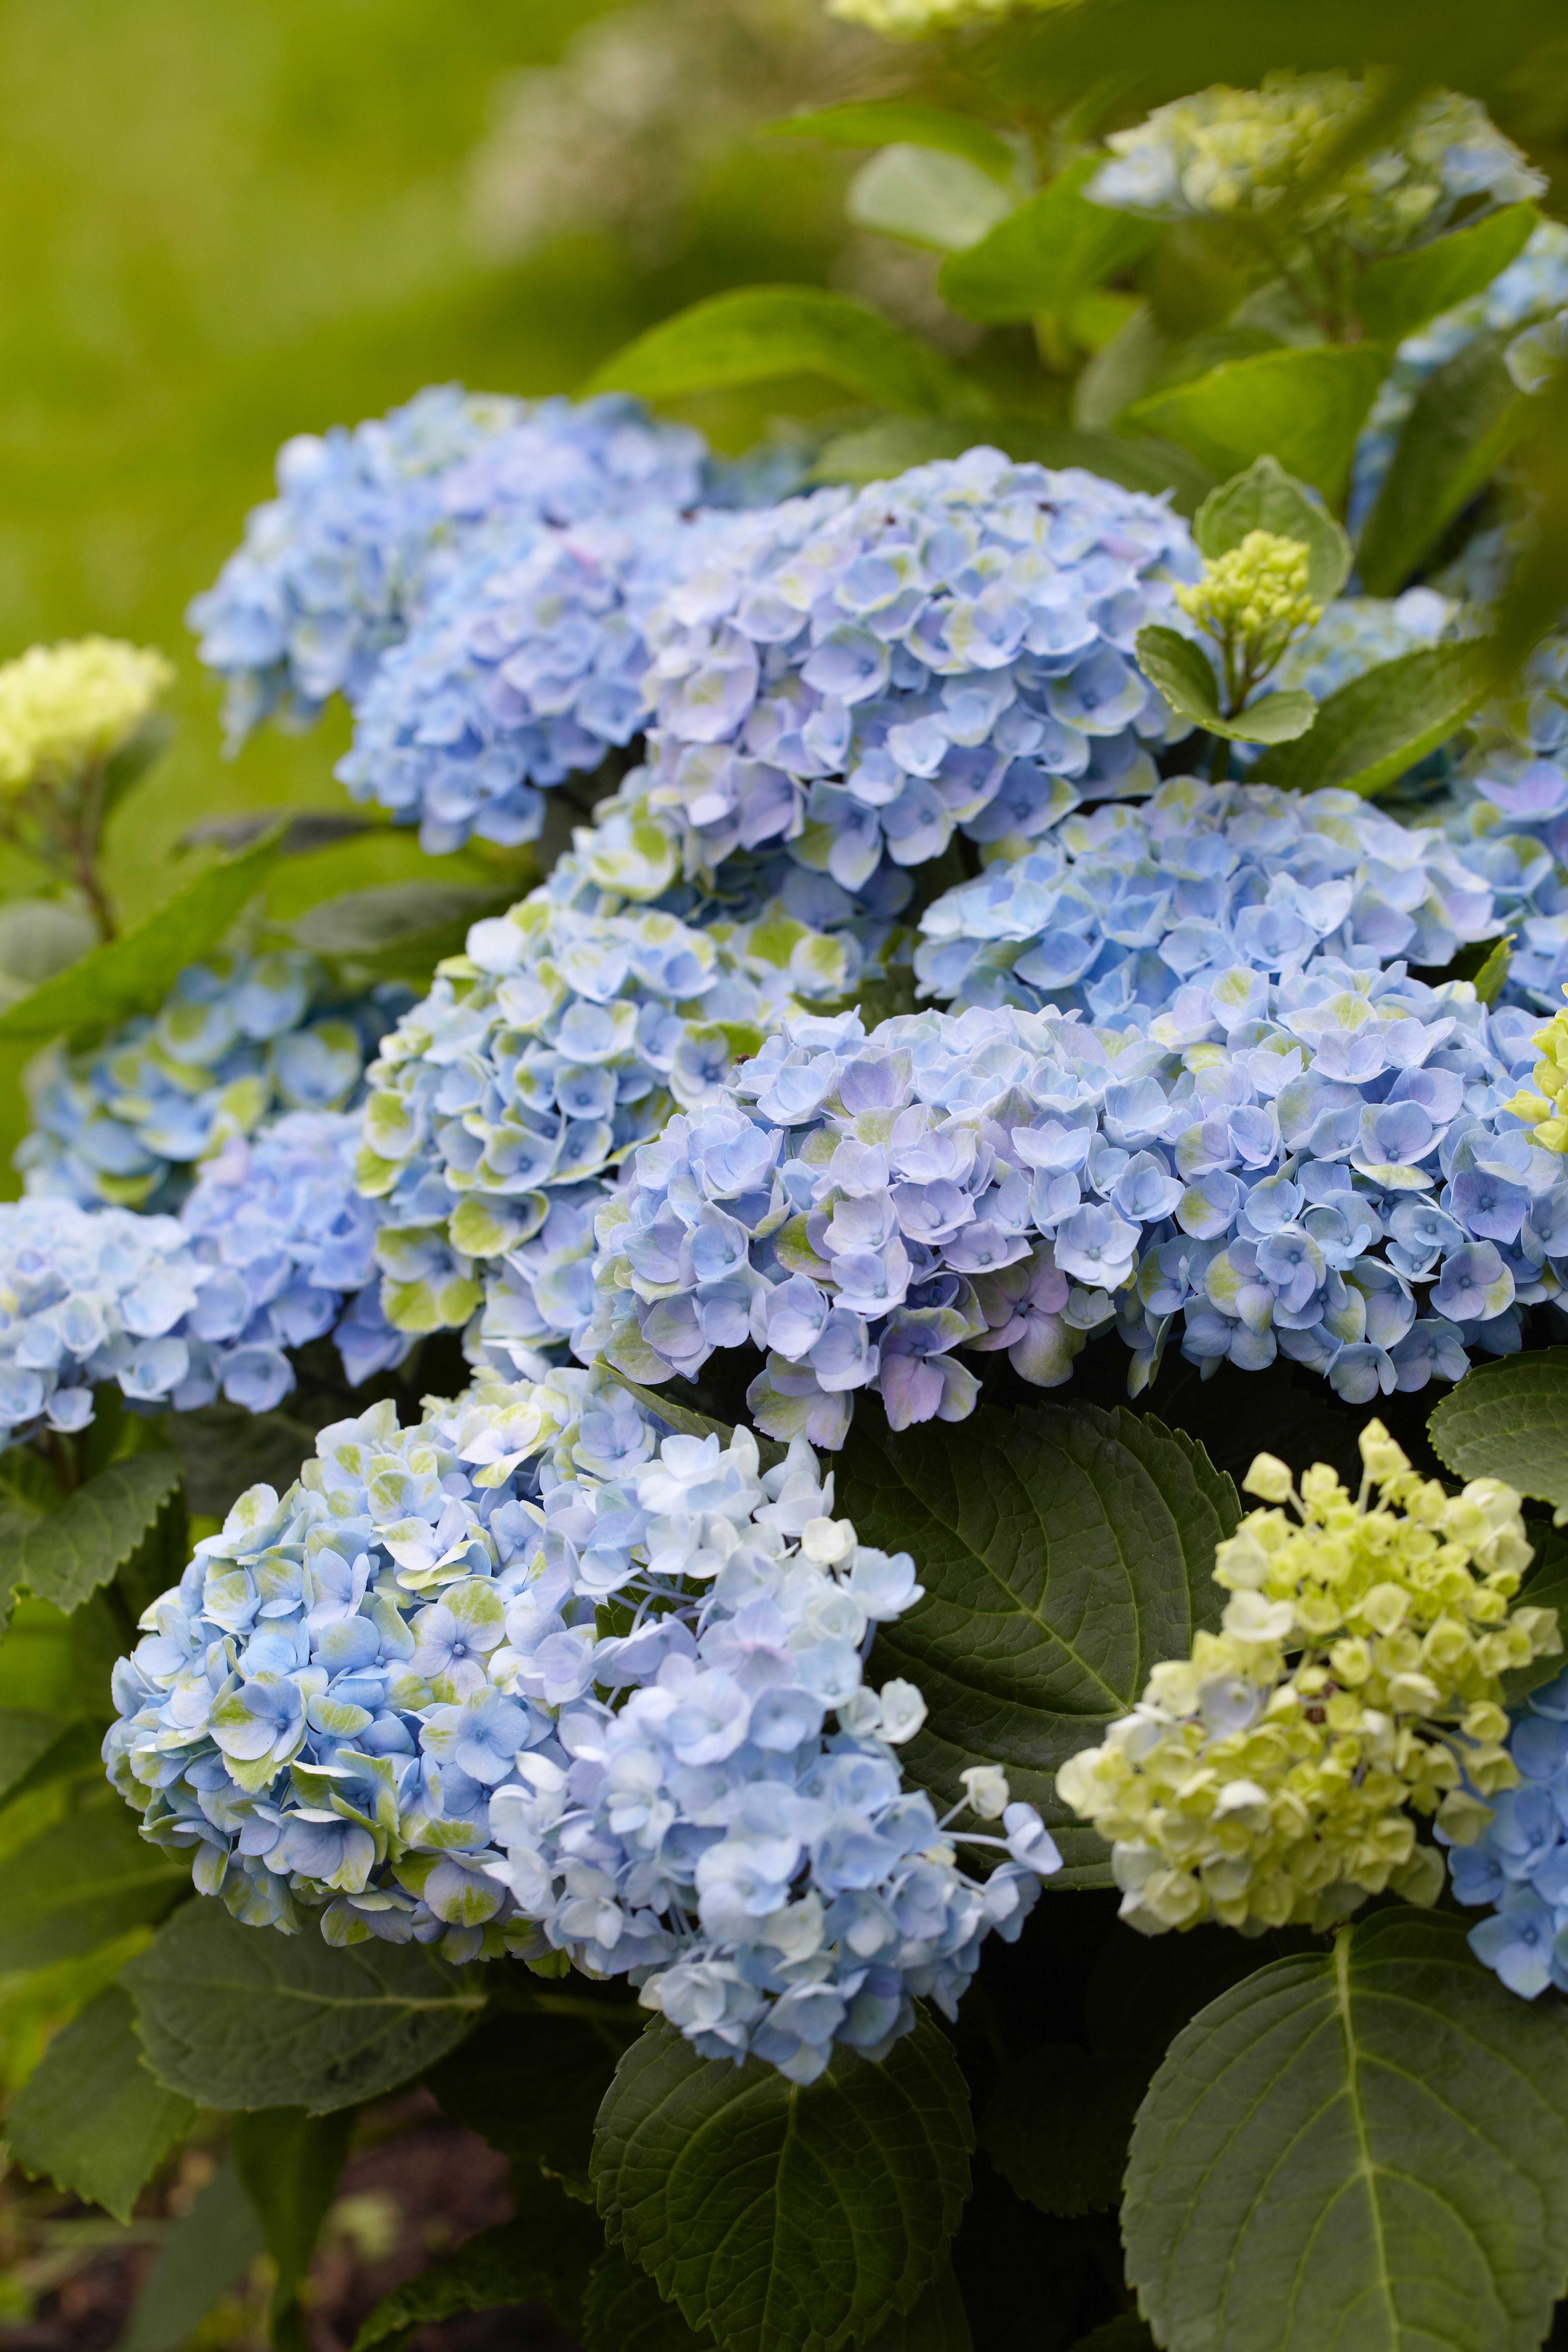 images/plants/hydrangea/hyd-magical-everlasting-revolution/hyd-magical-everlasting-revolution-0131.jpg